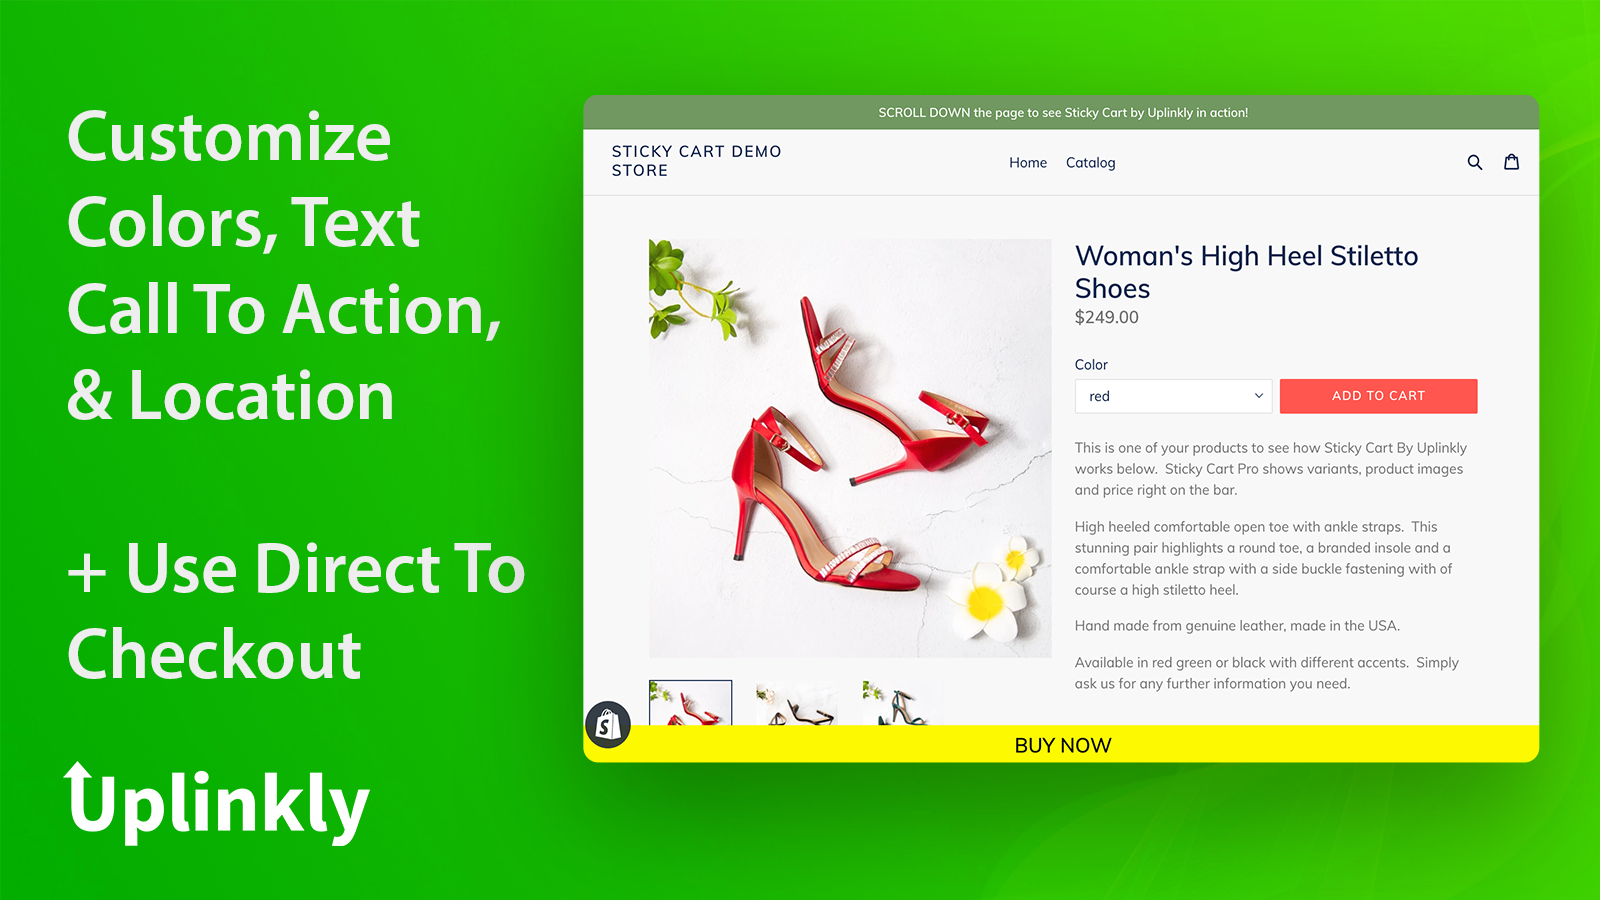 Sticky Add to Cart is always visible customize colors & text